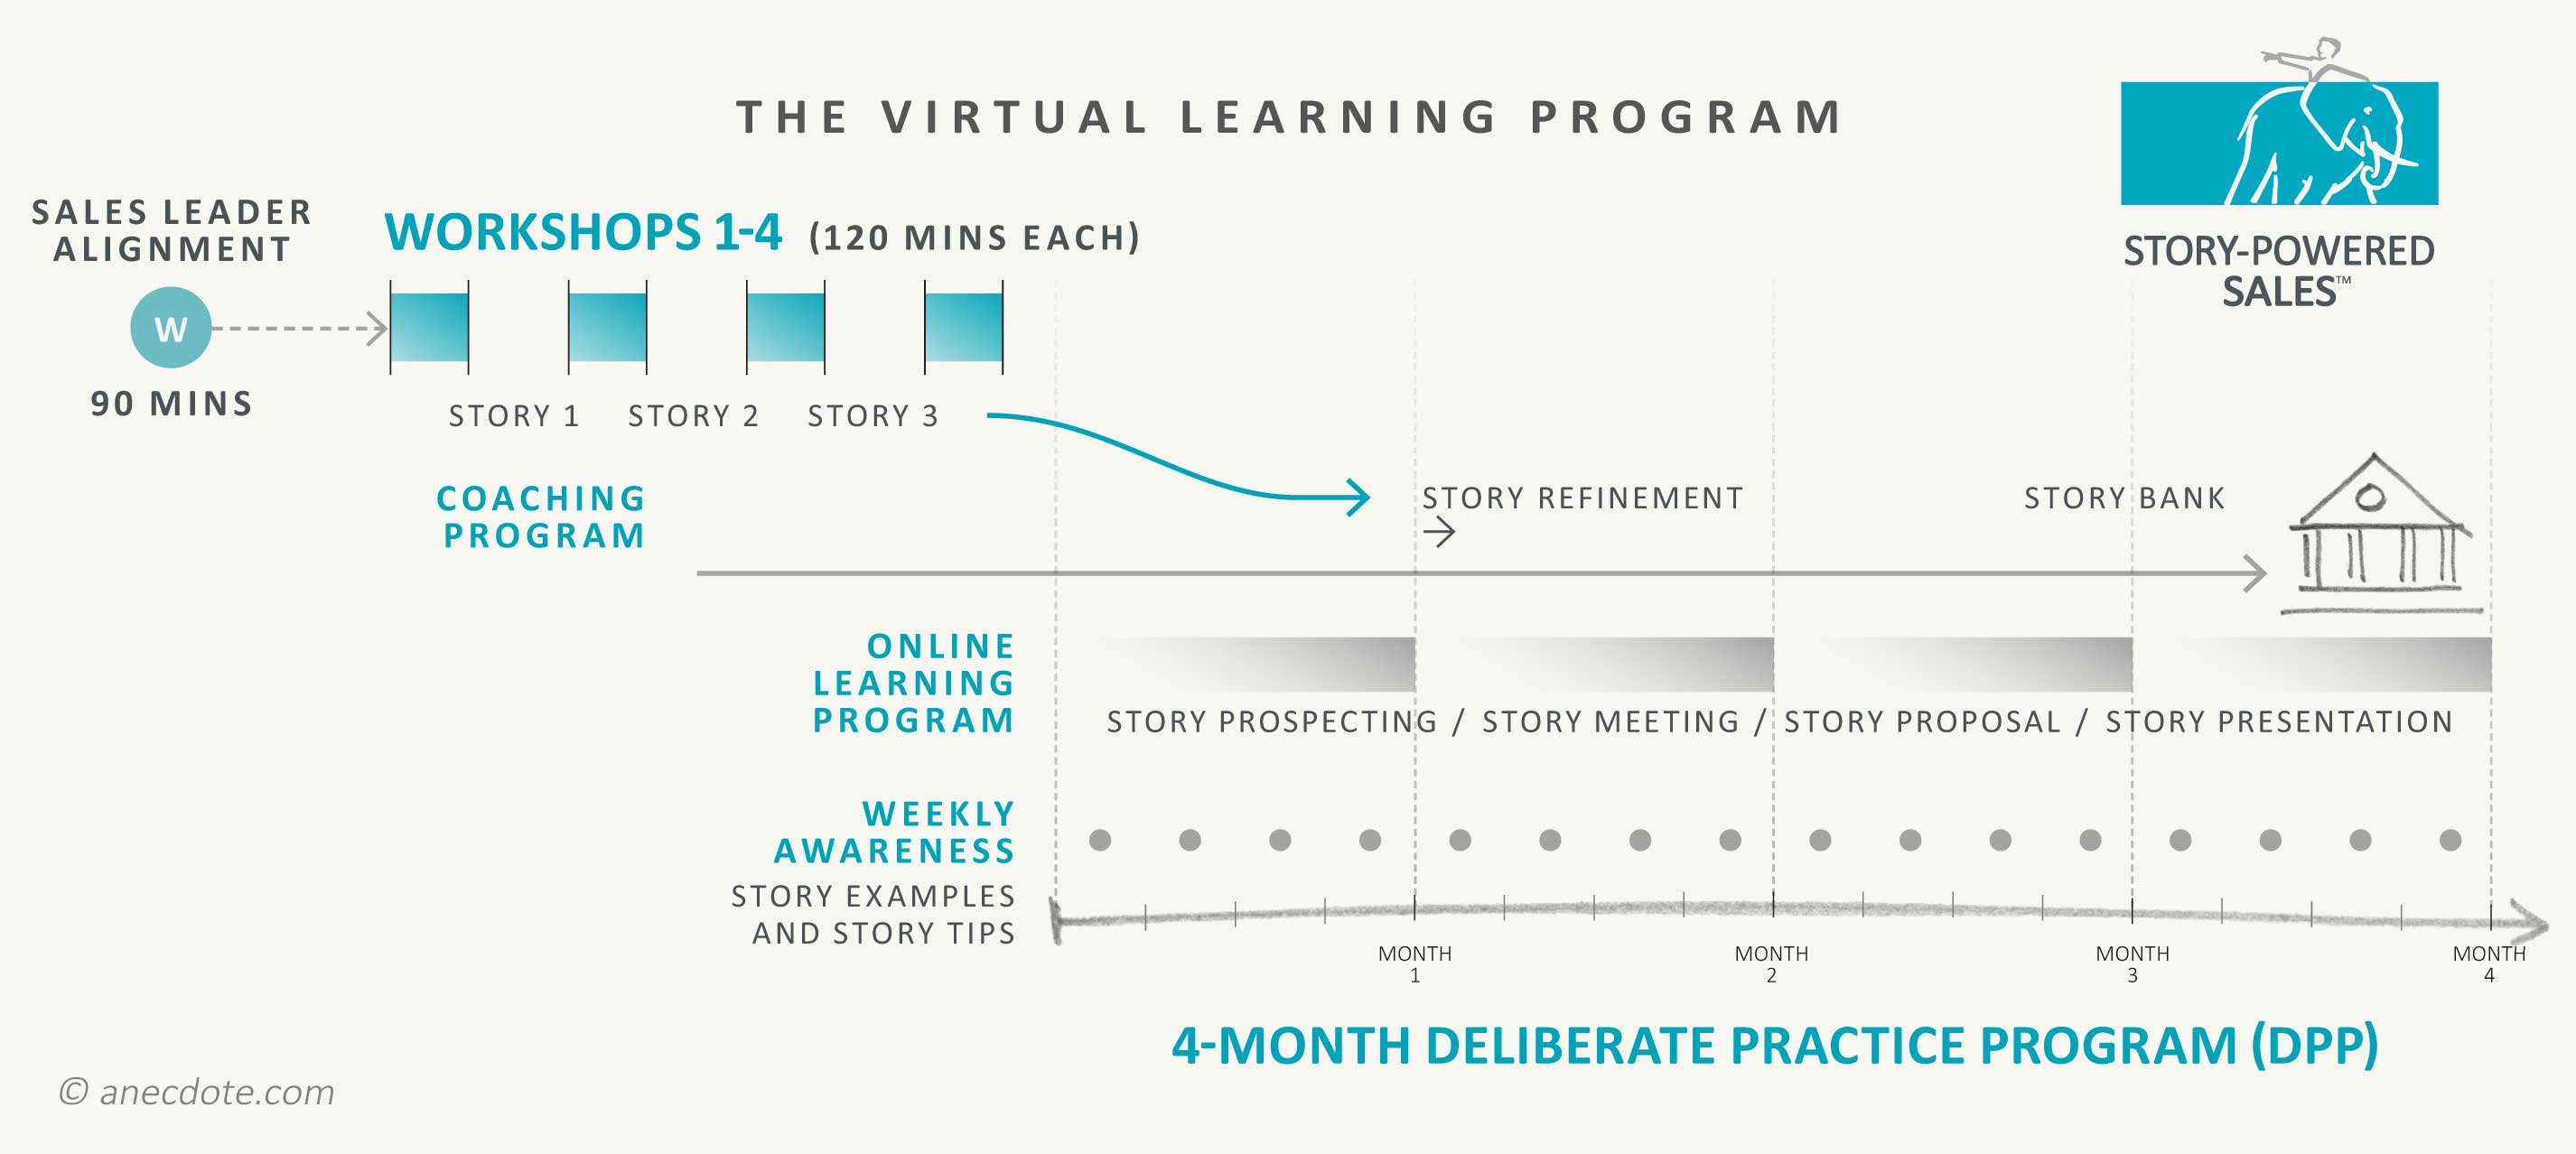 The virtual learning program Story-Powered Sales